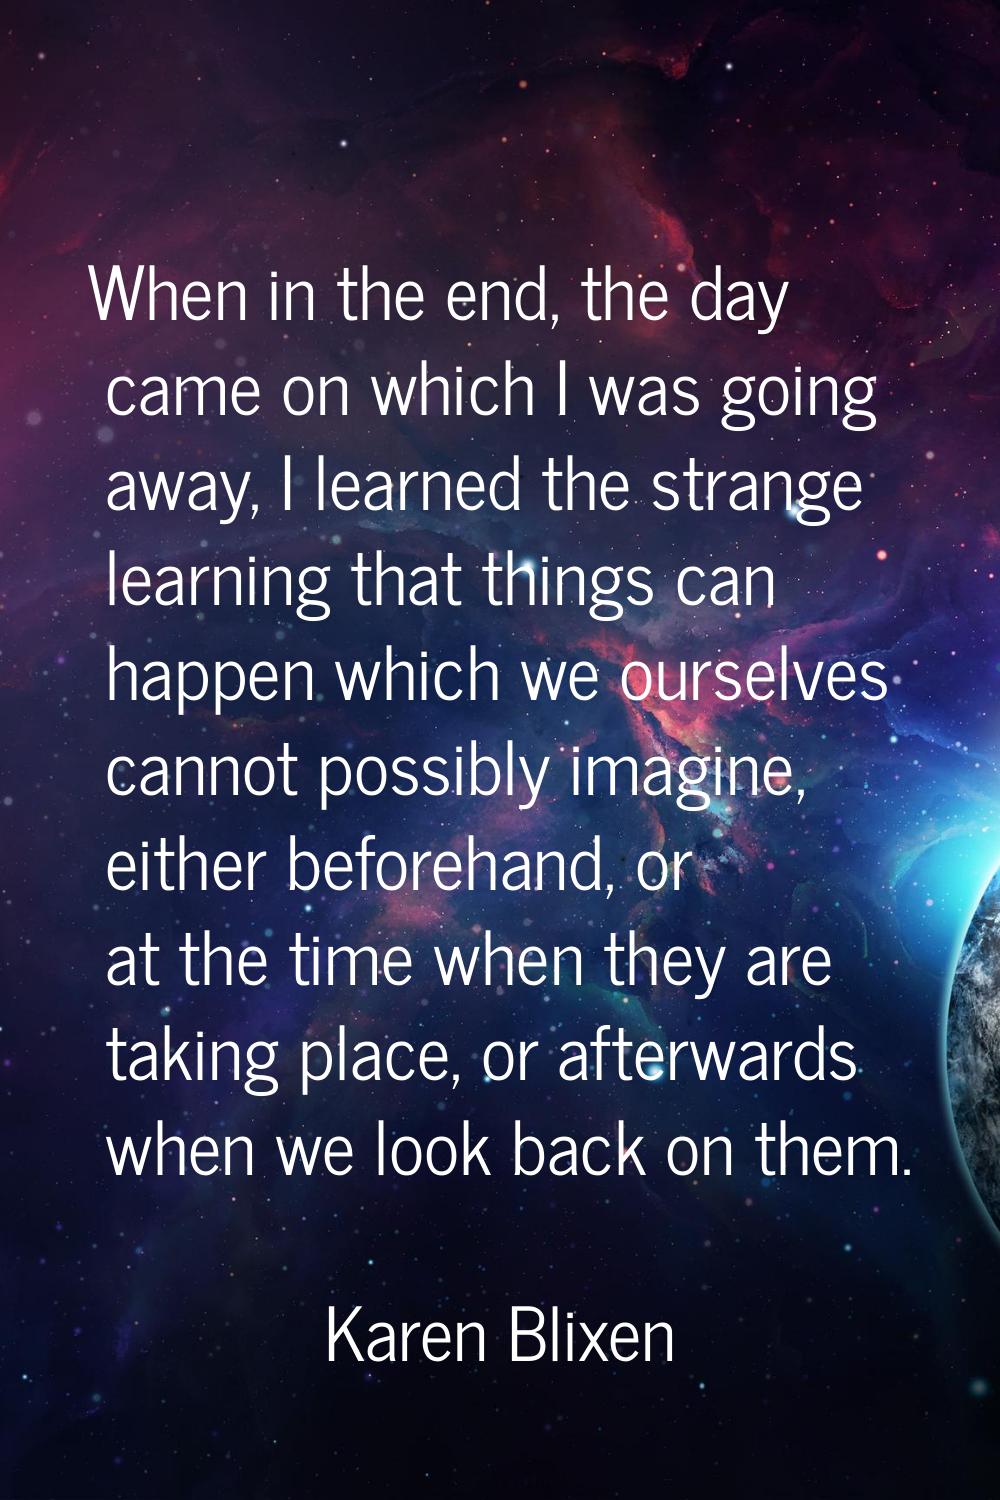 When in the end, the day came on which I was going away, I learned the strange learning that things